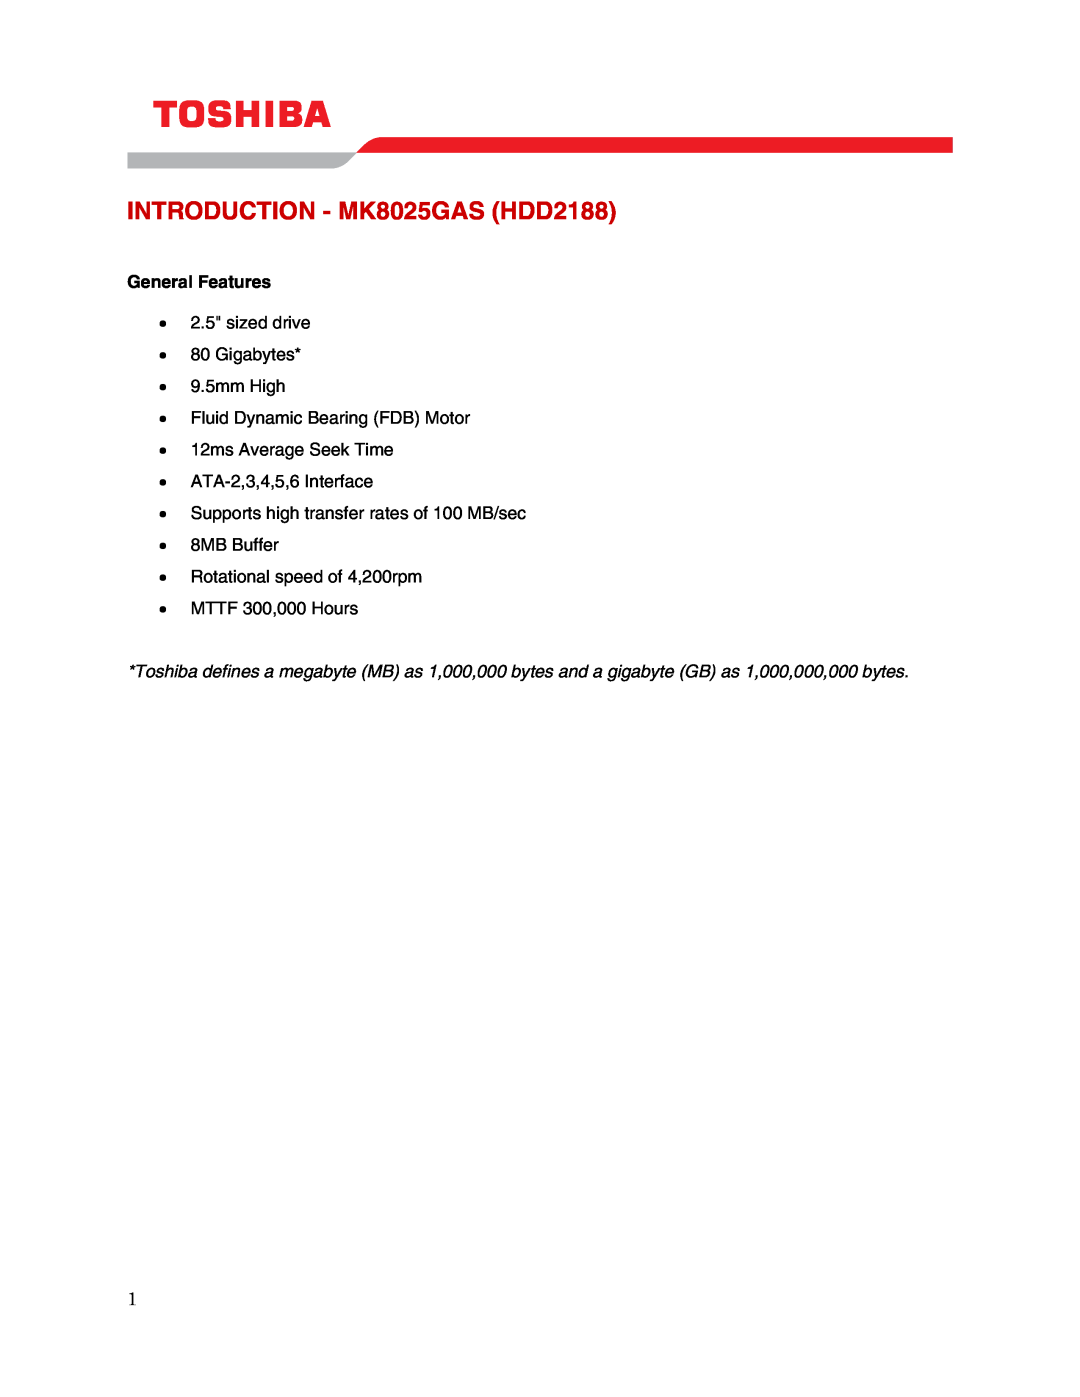 Toshiba user manual INTRODUCTION - MK8025GAS HDD2188, General Features 